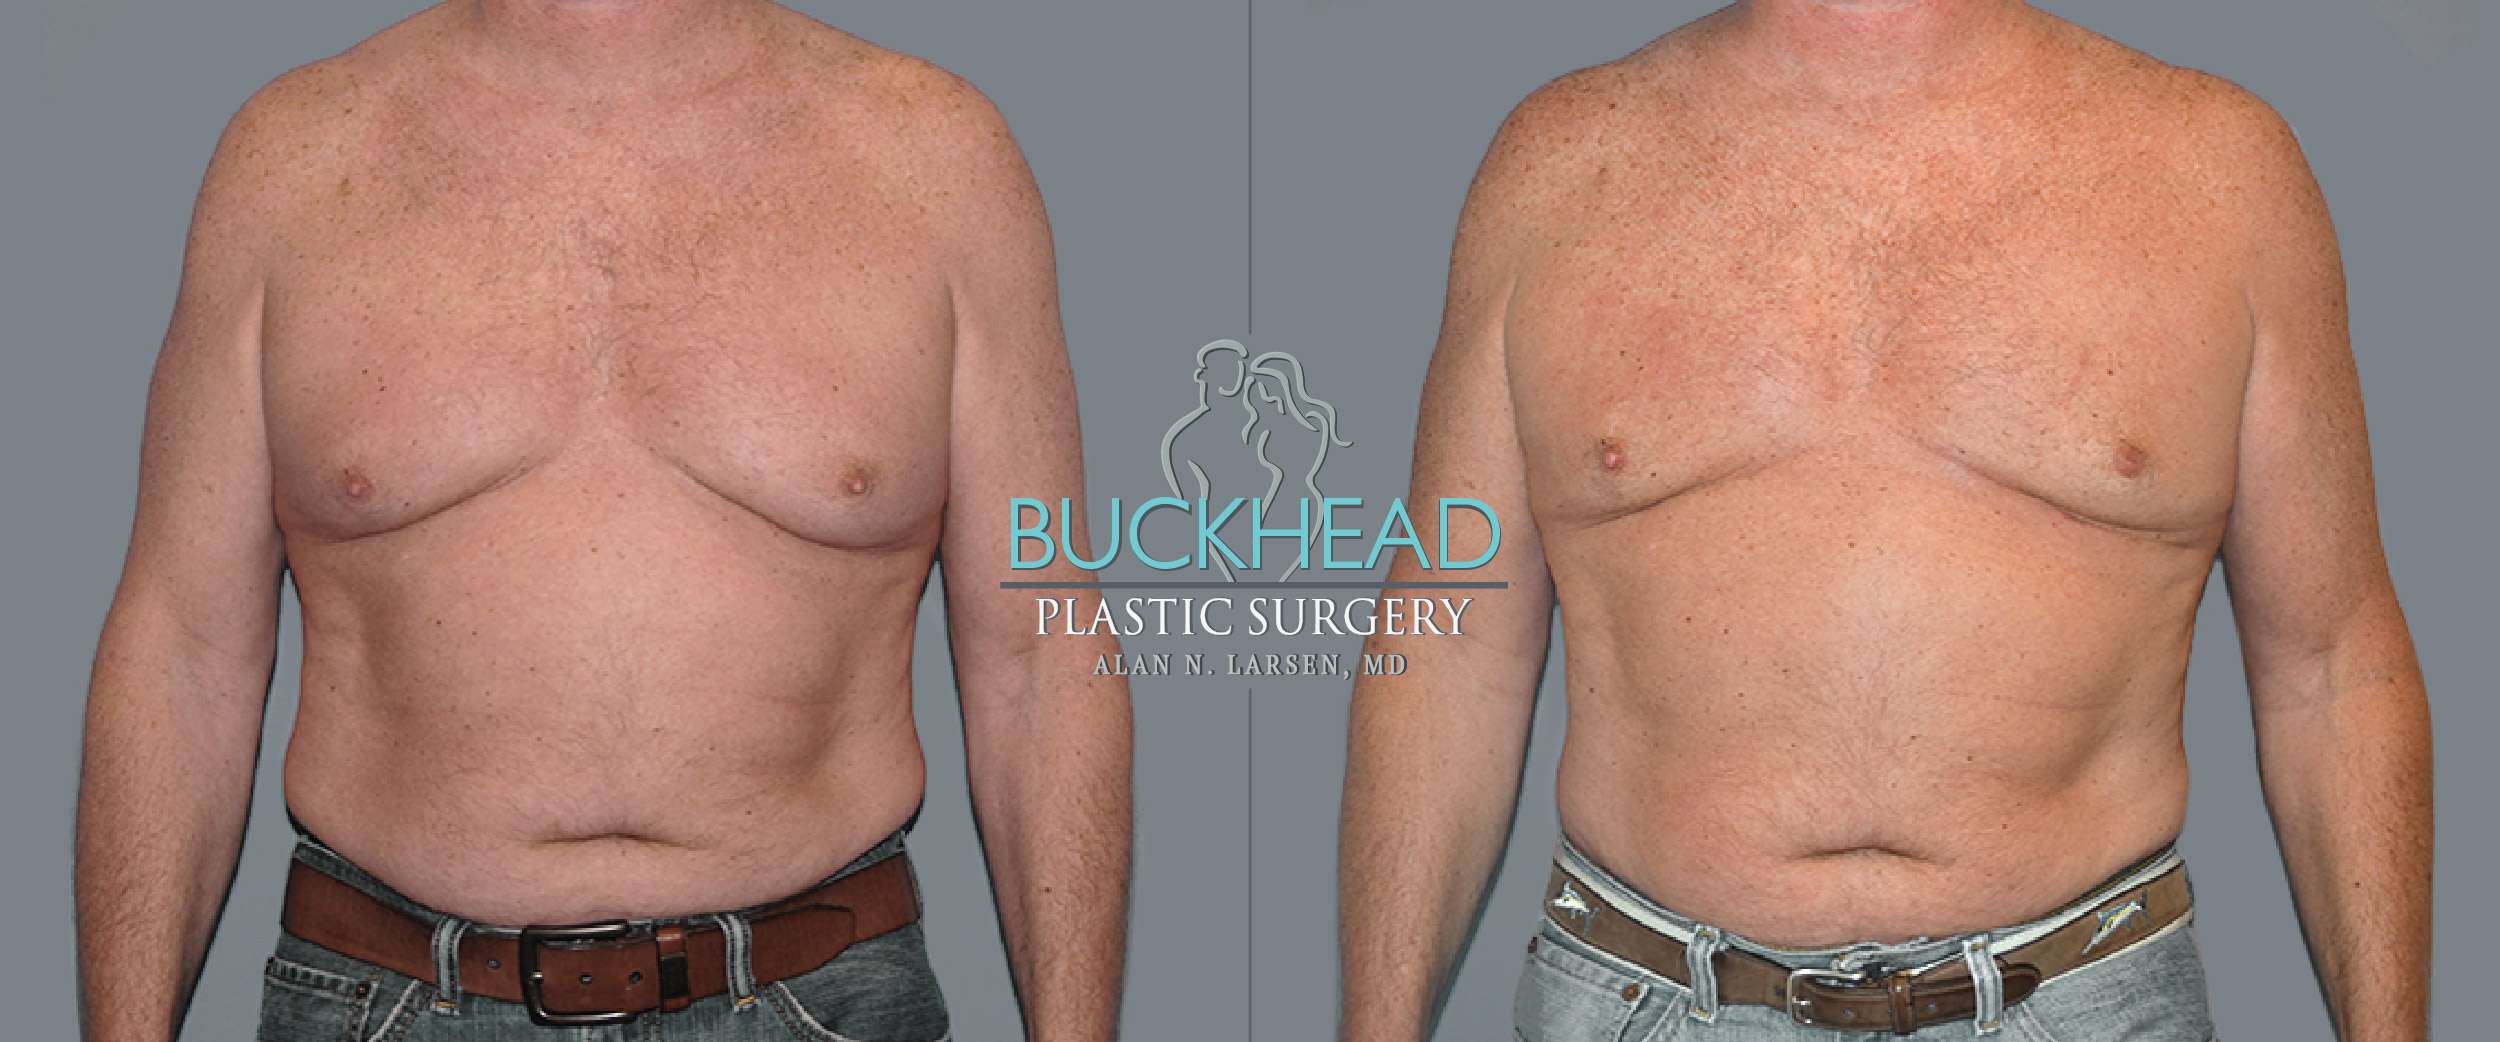 Before and After Photo Gallery | Gynecomastia - Male Breast Reduction & Correction | Buckhead Plastic Surgery | Board-Certified Plastic Surgeon in Atlanta GA